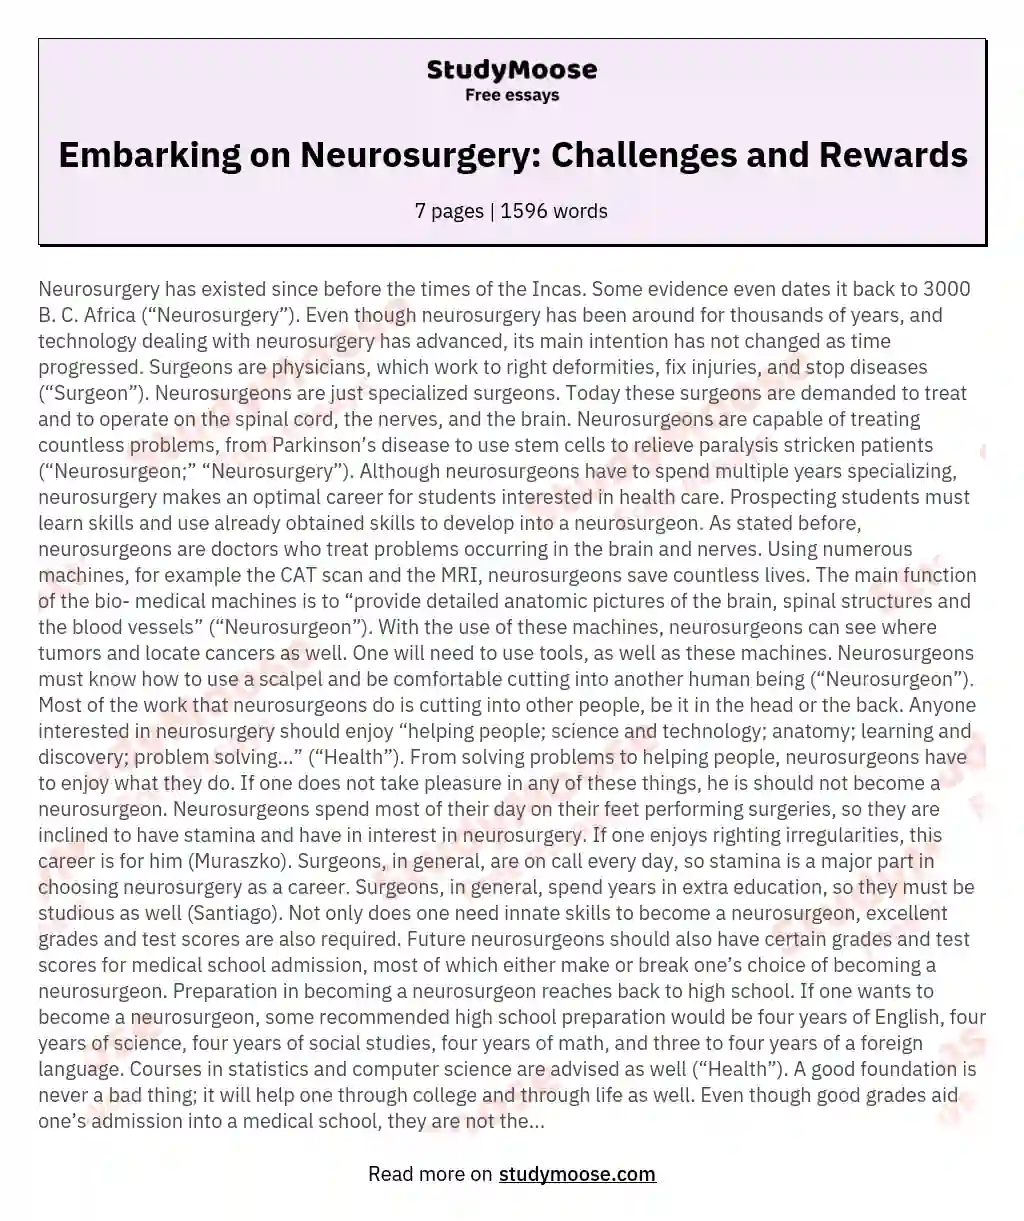 Embarking on Neurosurgery: Challenges and Rewards essay